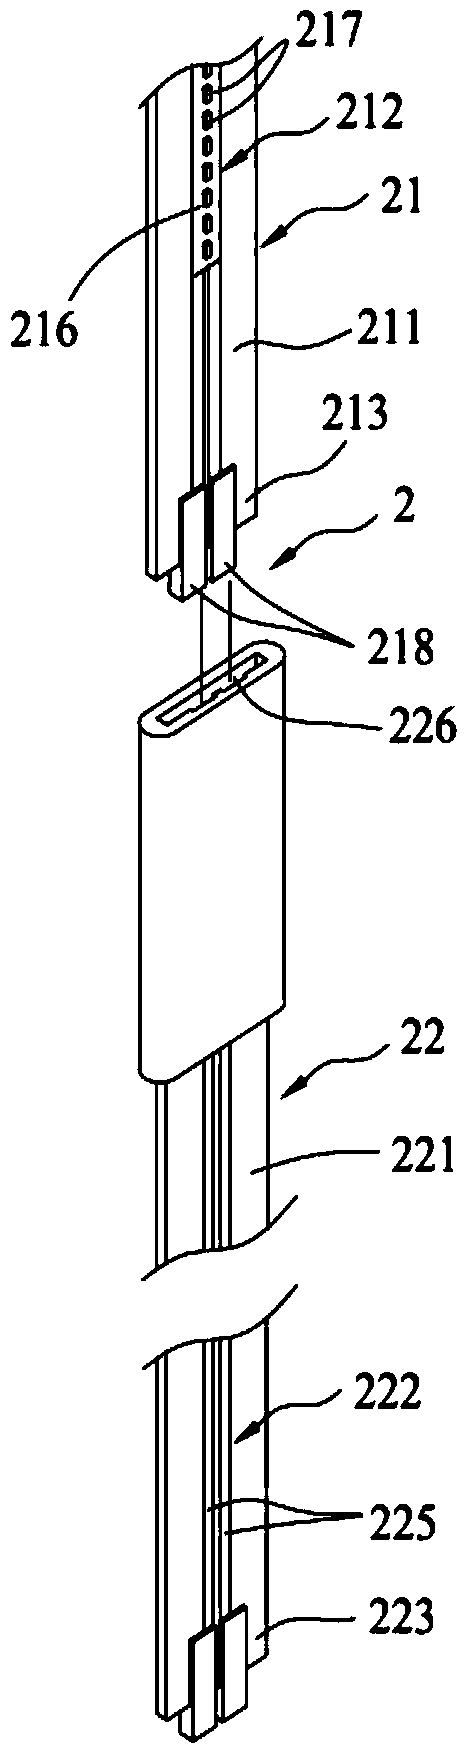 An elastic conductive device and a lamp using the same